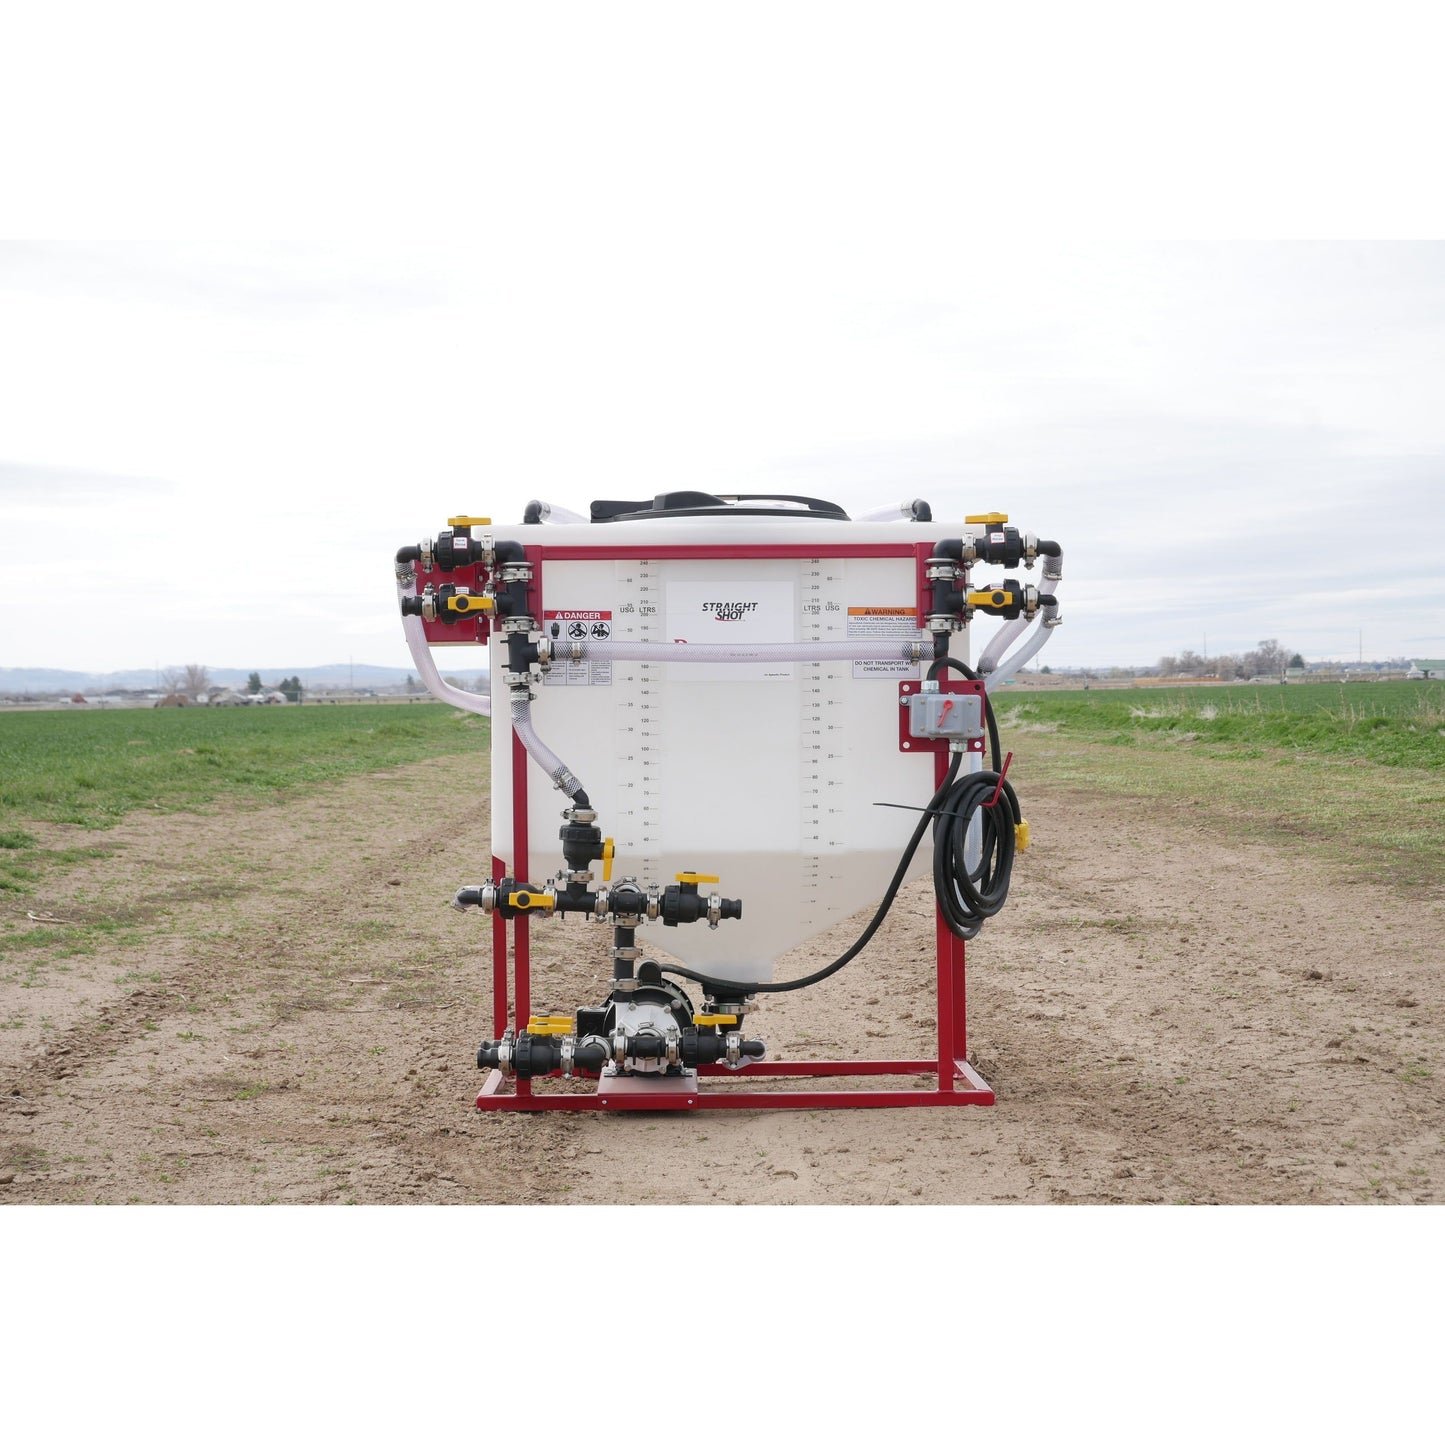 Drone Station Chemical Mixing System